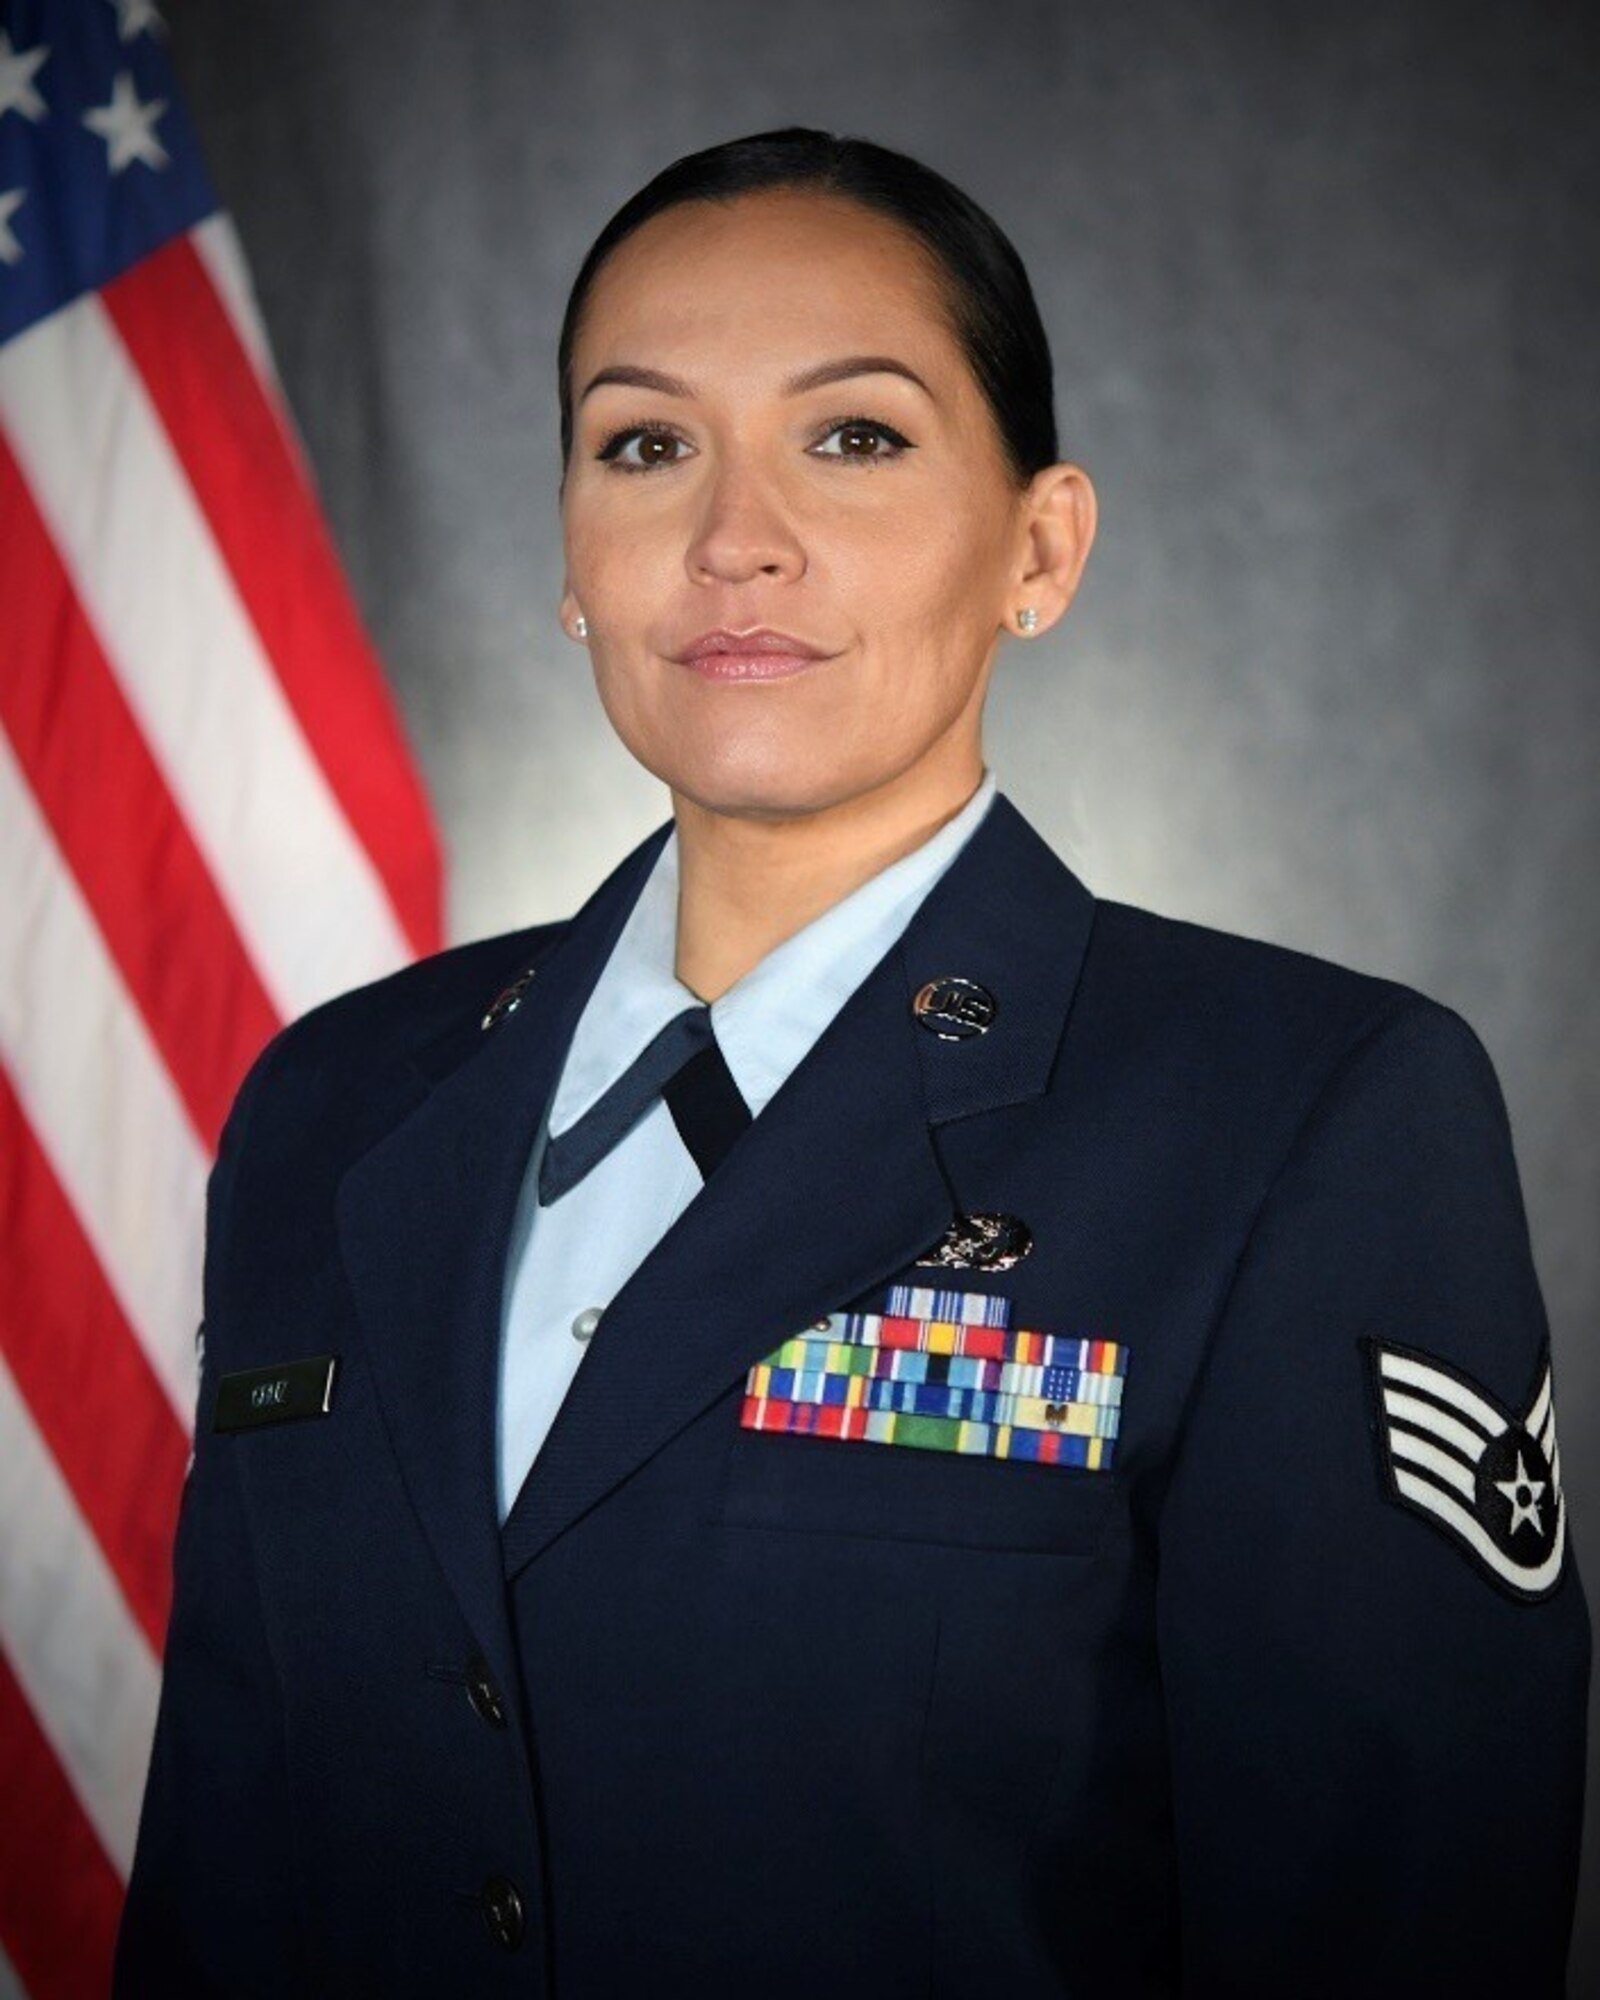 109th Airlift Wing member Staff Sgt. Jessica Lee Cruz named New York State ‘Airman of the Year’